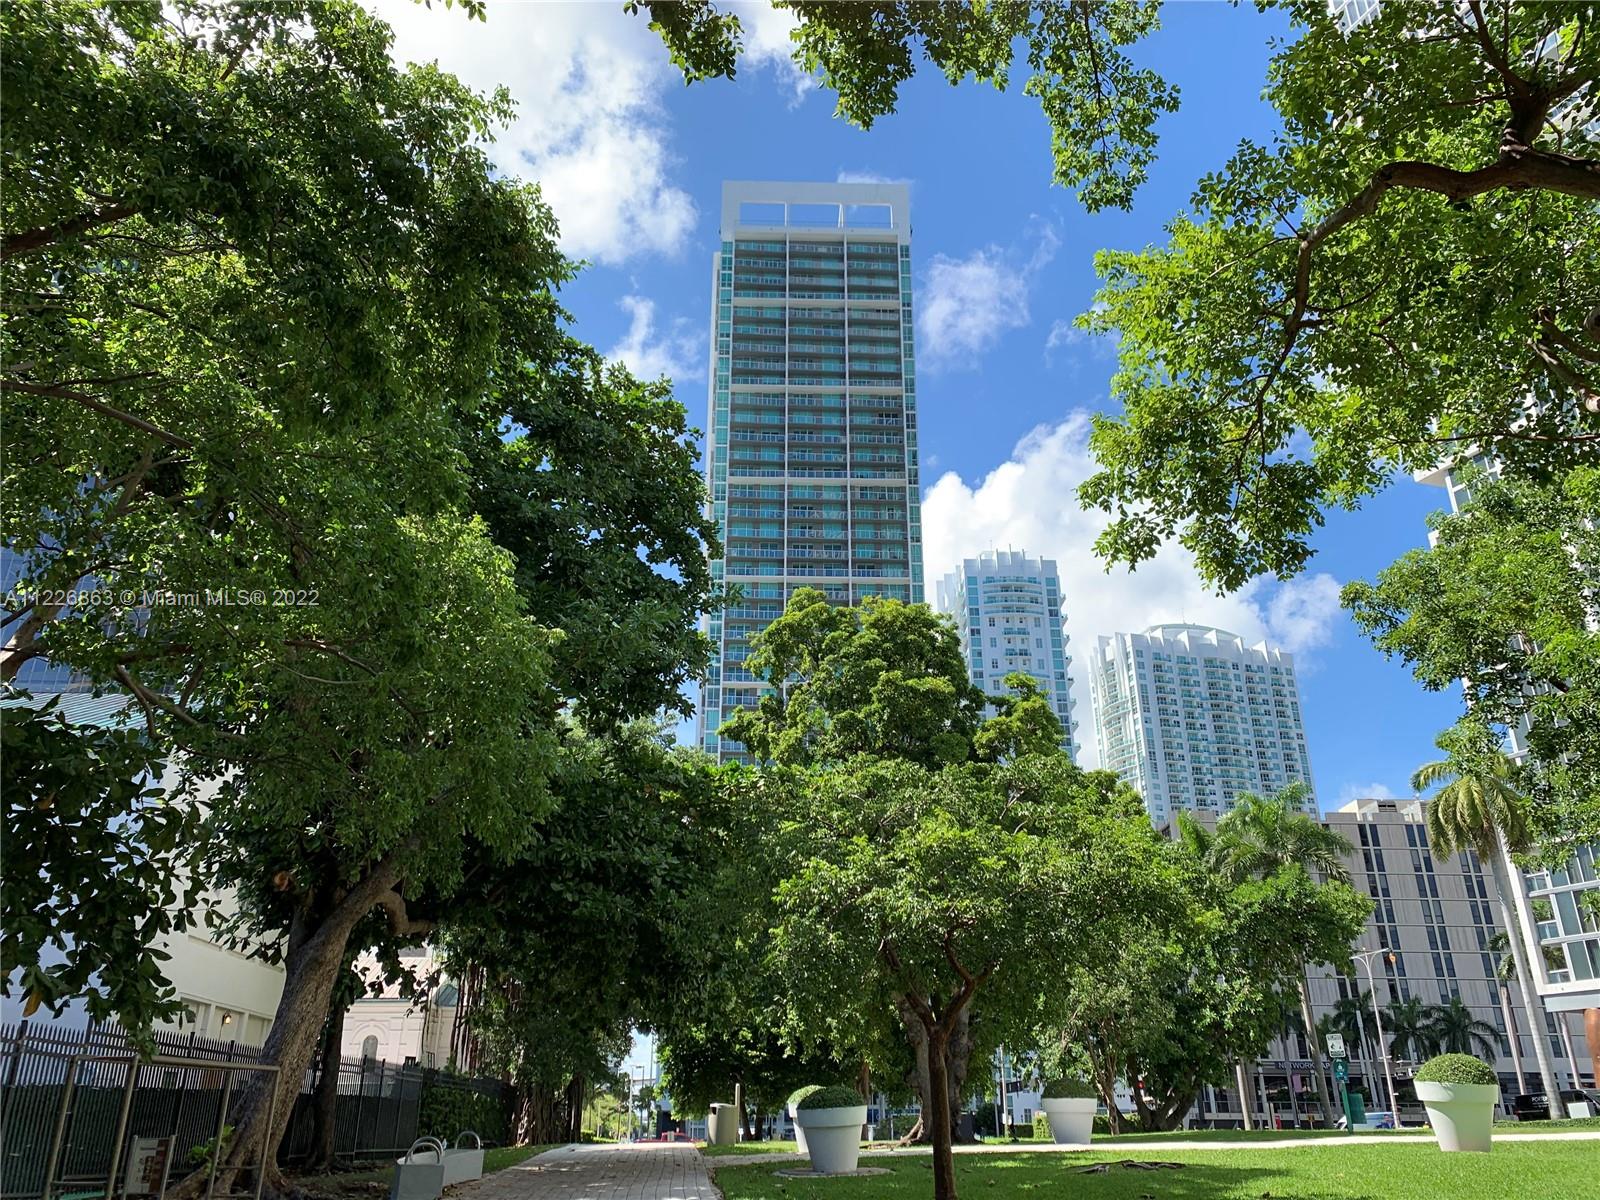 BEAUTIFUL AND SPACIOUS 2 BED 2 BATH CONDO WITH PORCELAIN FLOORS ALL THROUGH-OUT. EUROPEAN
KITCHEN WITH STAINLESS STEEL APPLIANCES AND QUARTZ COUNTER TOPS. AMAZING VIEWS OF MIAMI RIVER,BISCAYNE BAY AND THE CITY. GREAT FULL SERVICE BUILDING WITH PLENTY OF AMENITIES. EXCELLENT LOCATION RIGTH ON BRICKELL AVE WALKING DISTANCE TO DOWNTOWN AND 1 BLOCK FROM BRICKELL CITICENTRE.